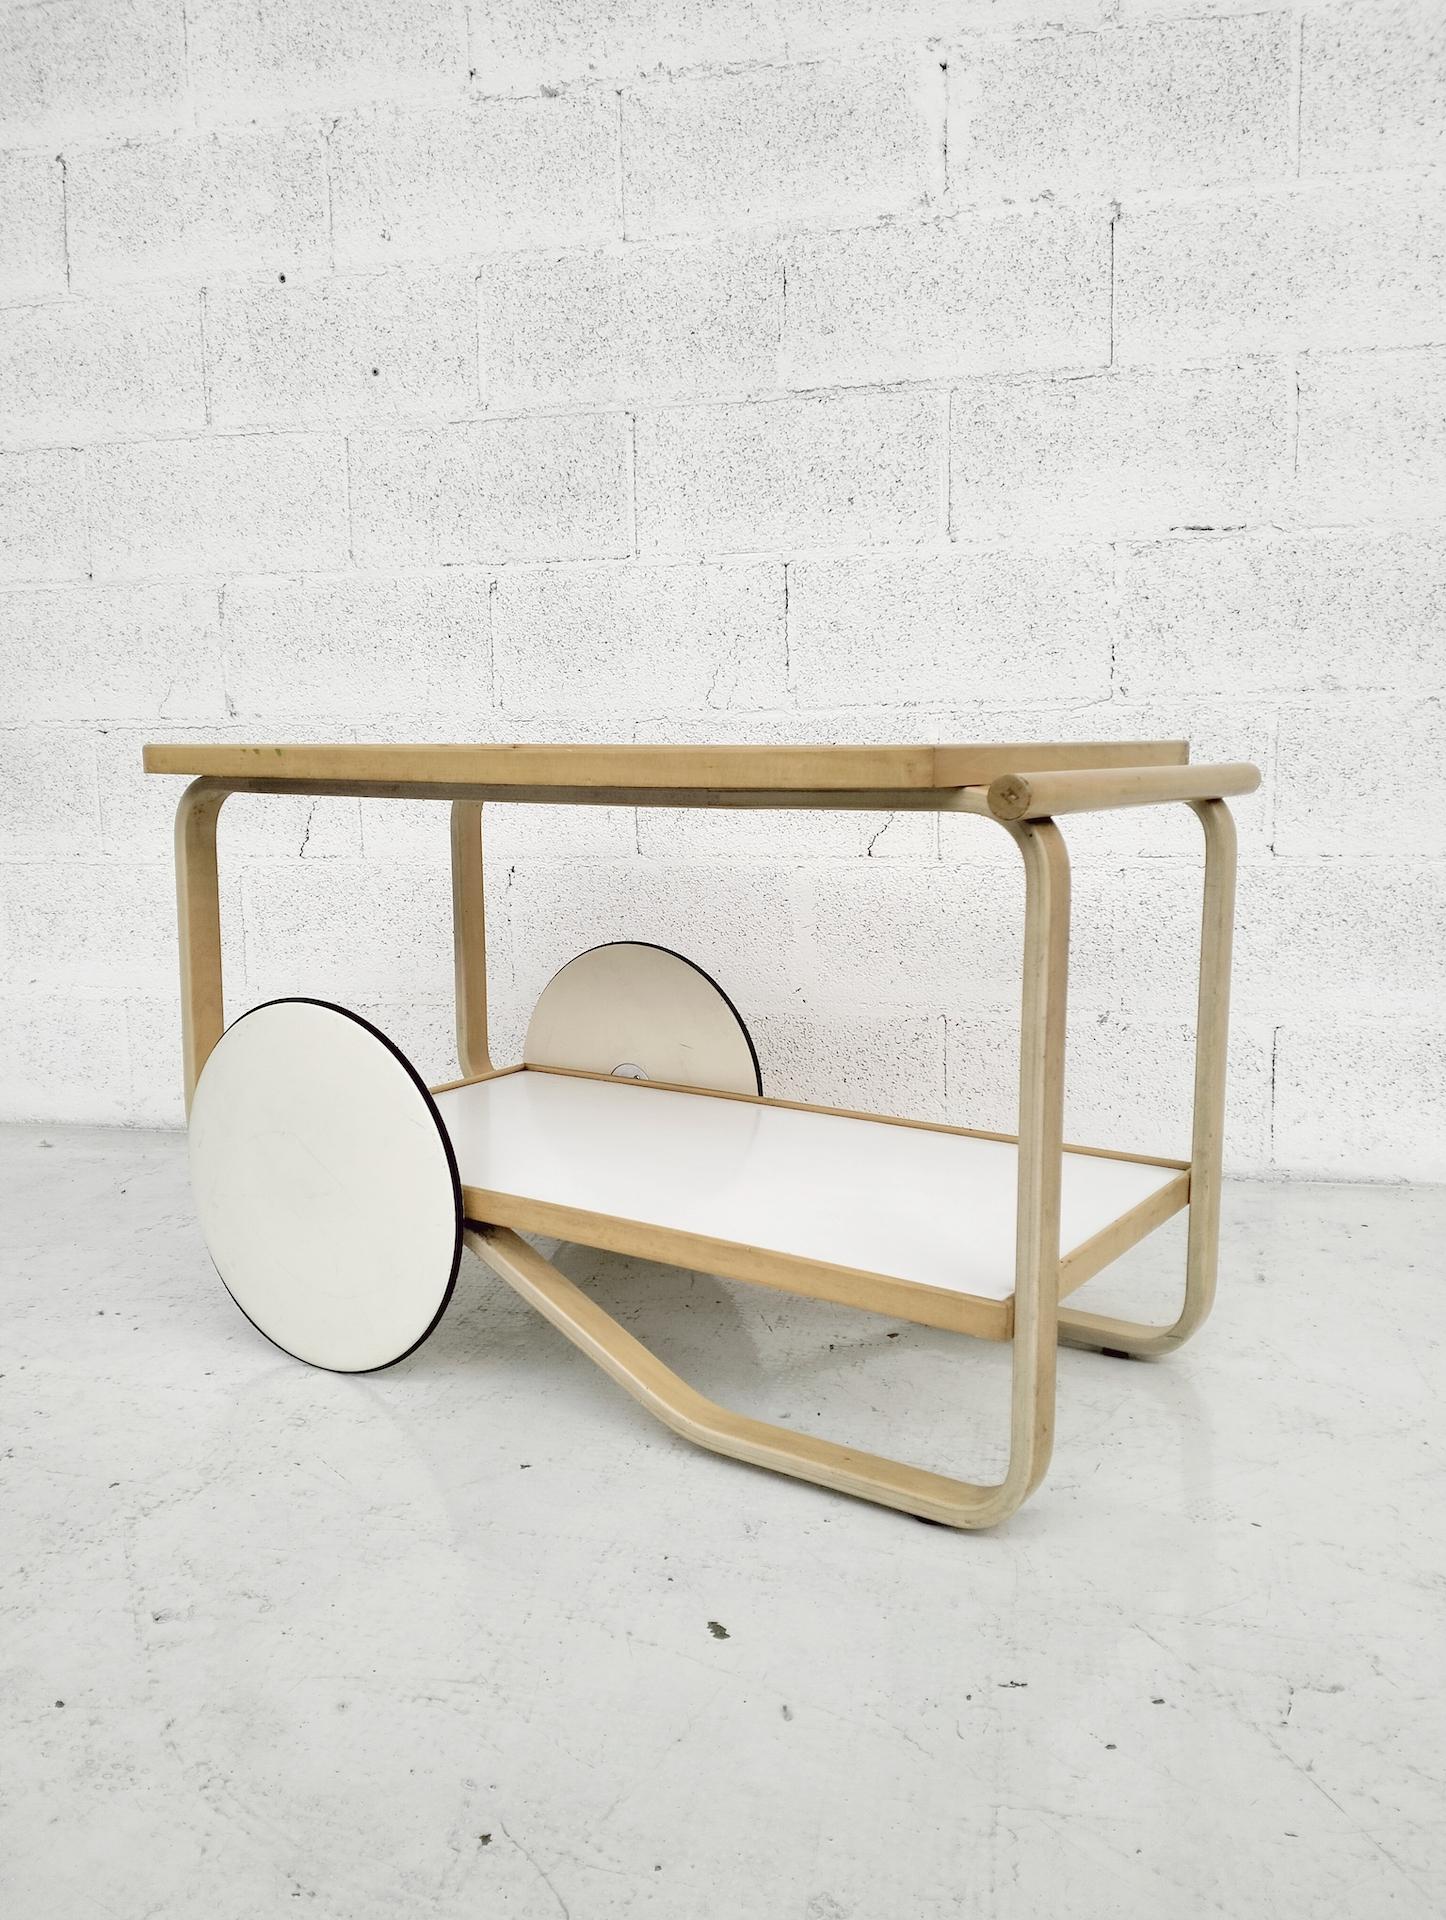 Tea Trolley 901 is a tea trolley inspired by British culture and Japanese woodwork. The light birch structure, guided by large wheels with black rubber ring, makes it agile and easy to move. Suitable for serving tea, coffee and drinks.

Hugo Alvar